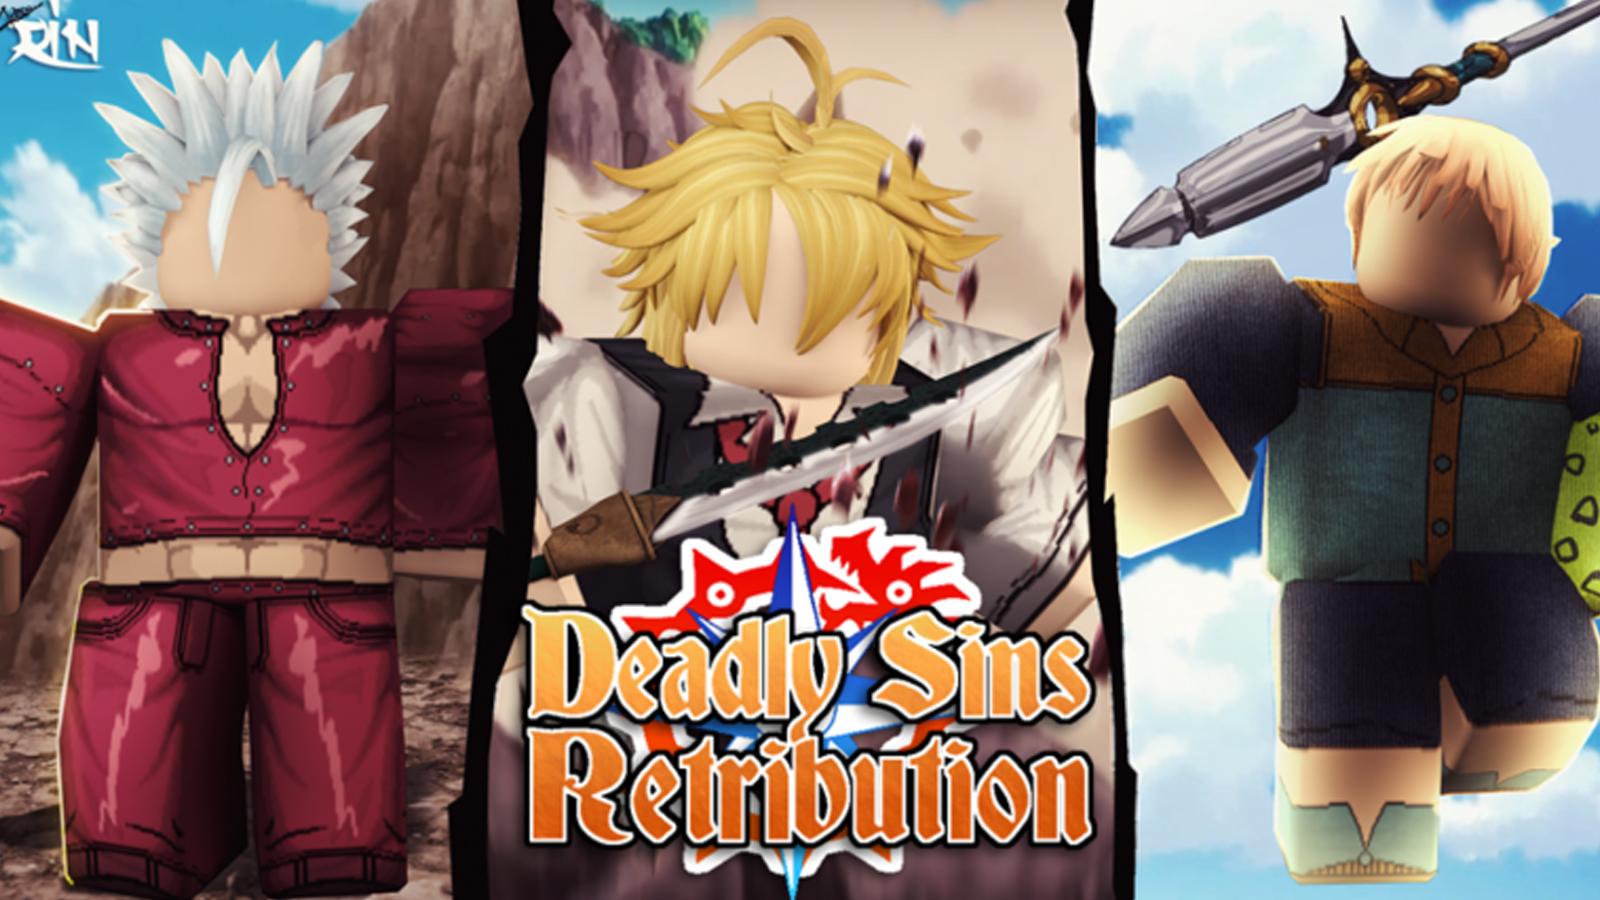 Feature image for Deadly Sins Retribution